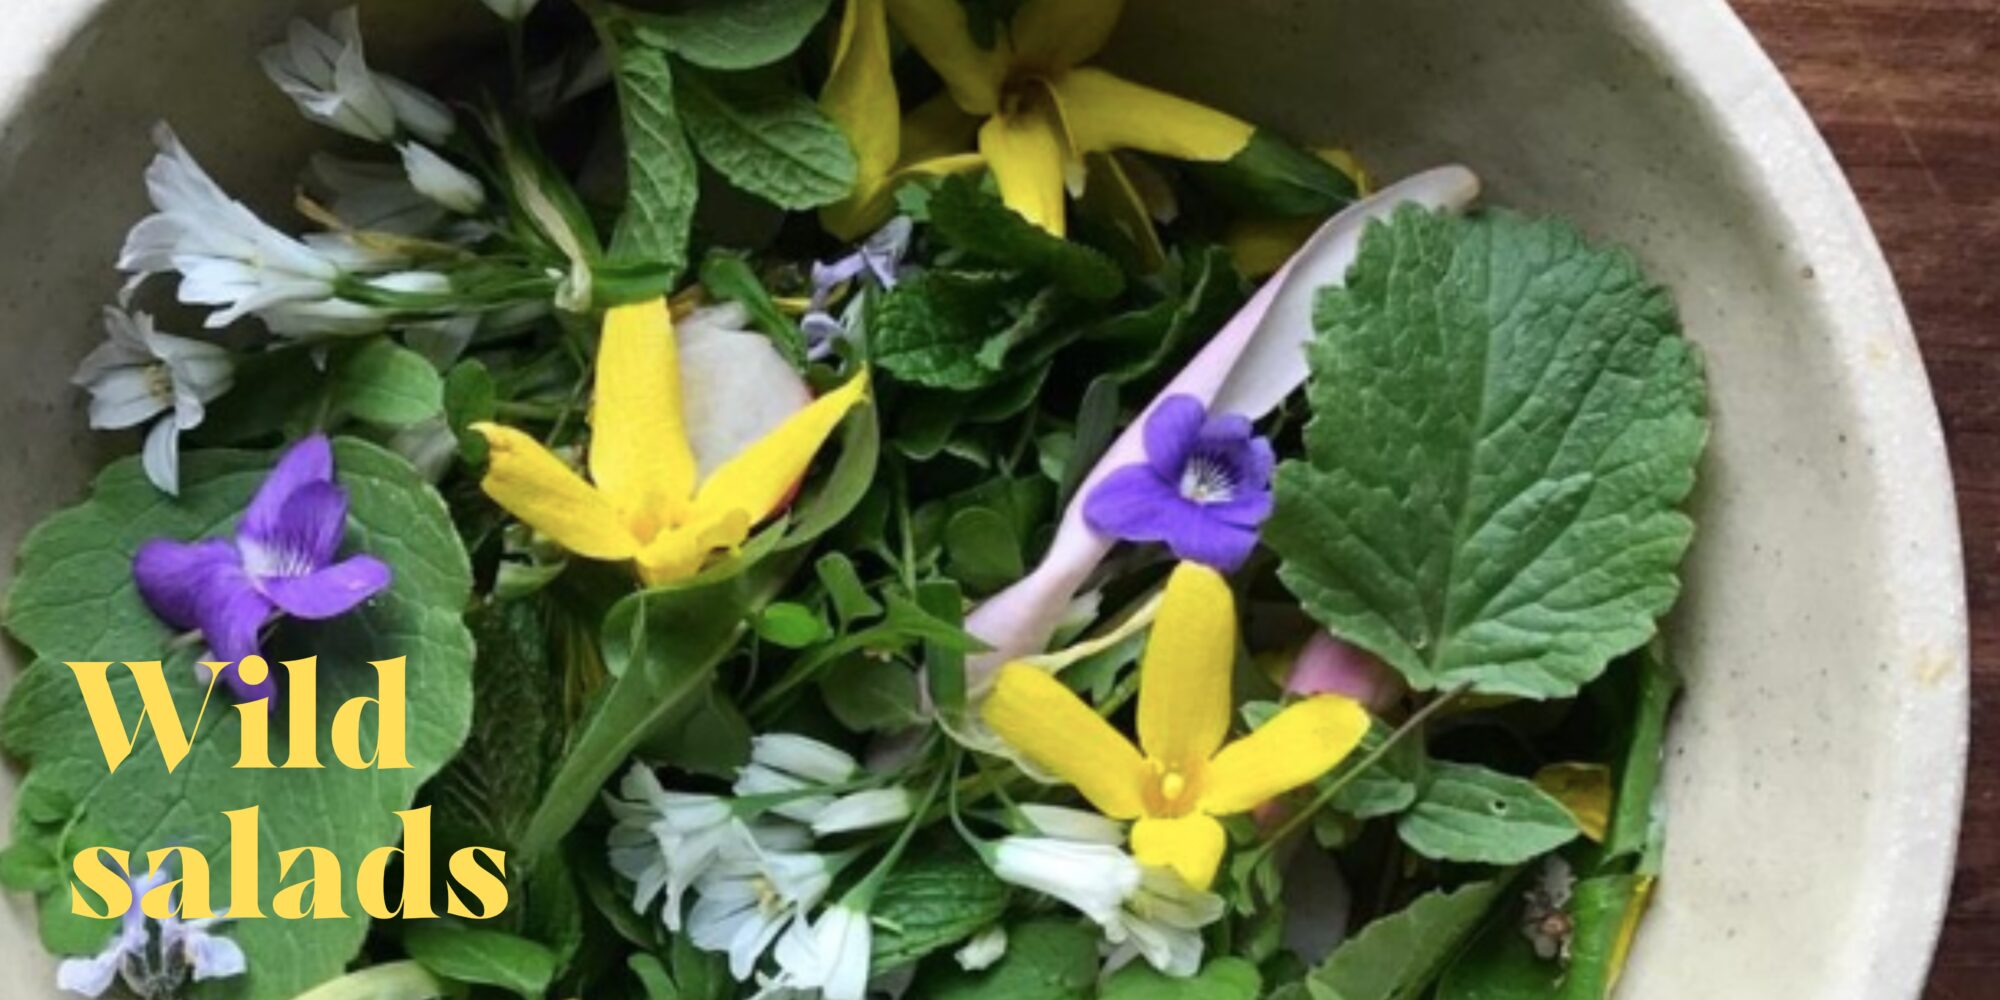 A bowl of flowers and leaves